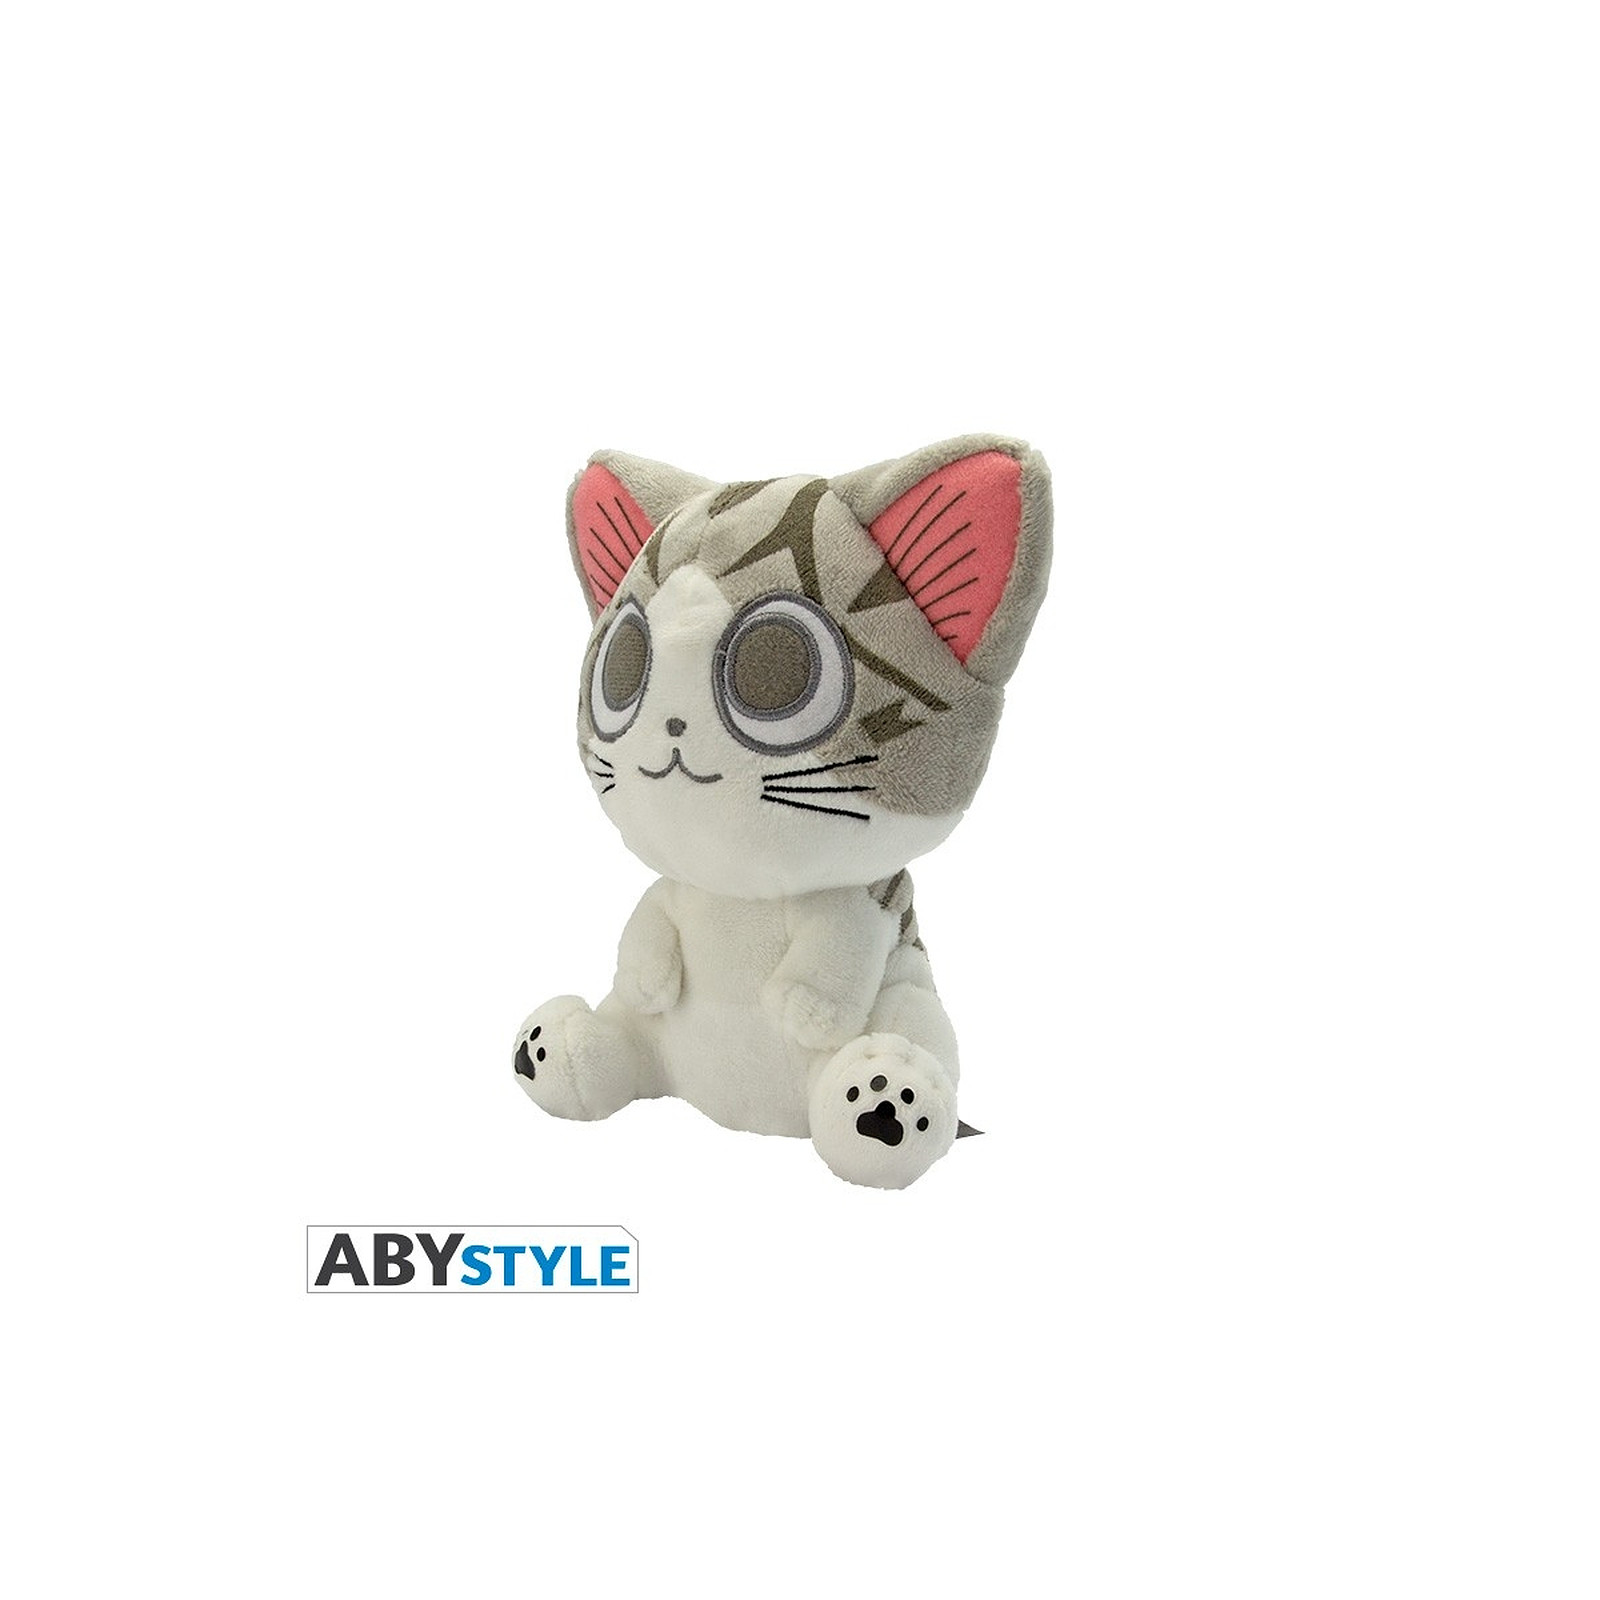 Chi - Peluche Chi 15 cm - Peluches Abystyle